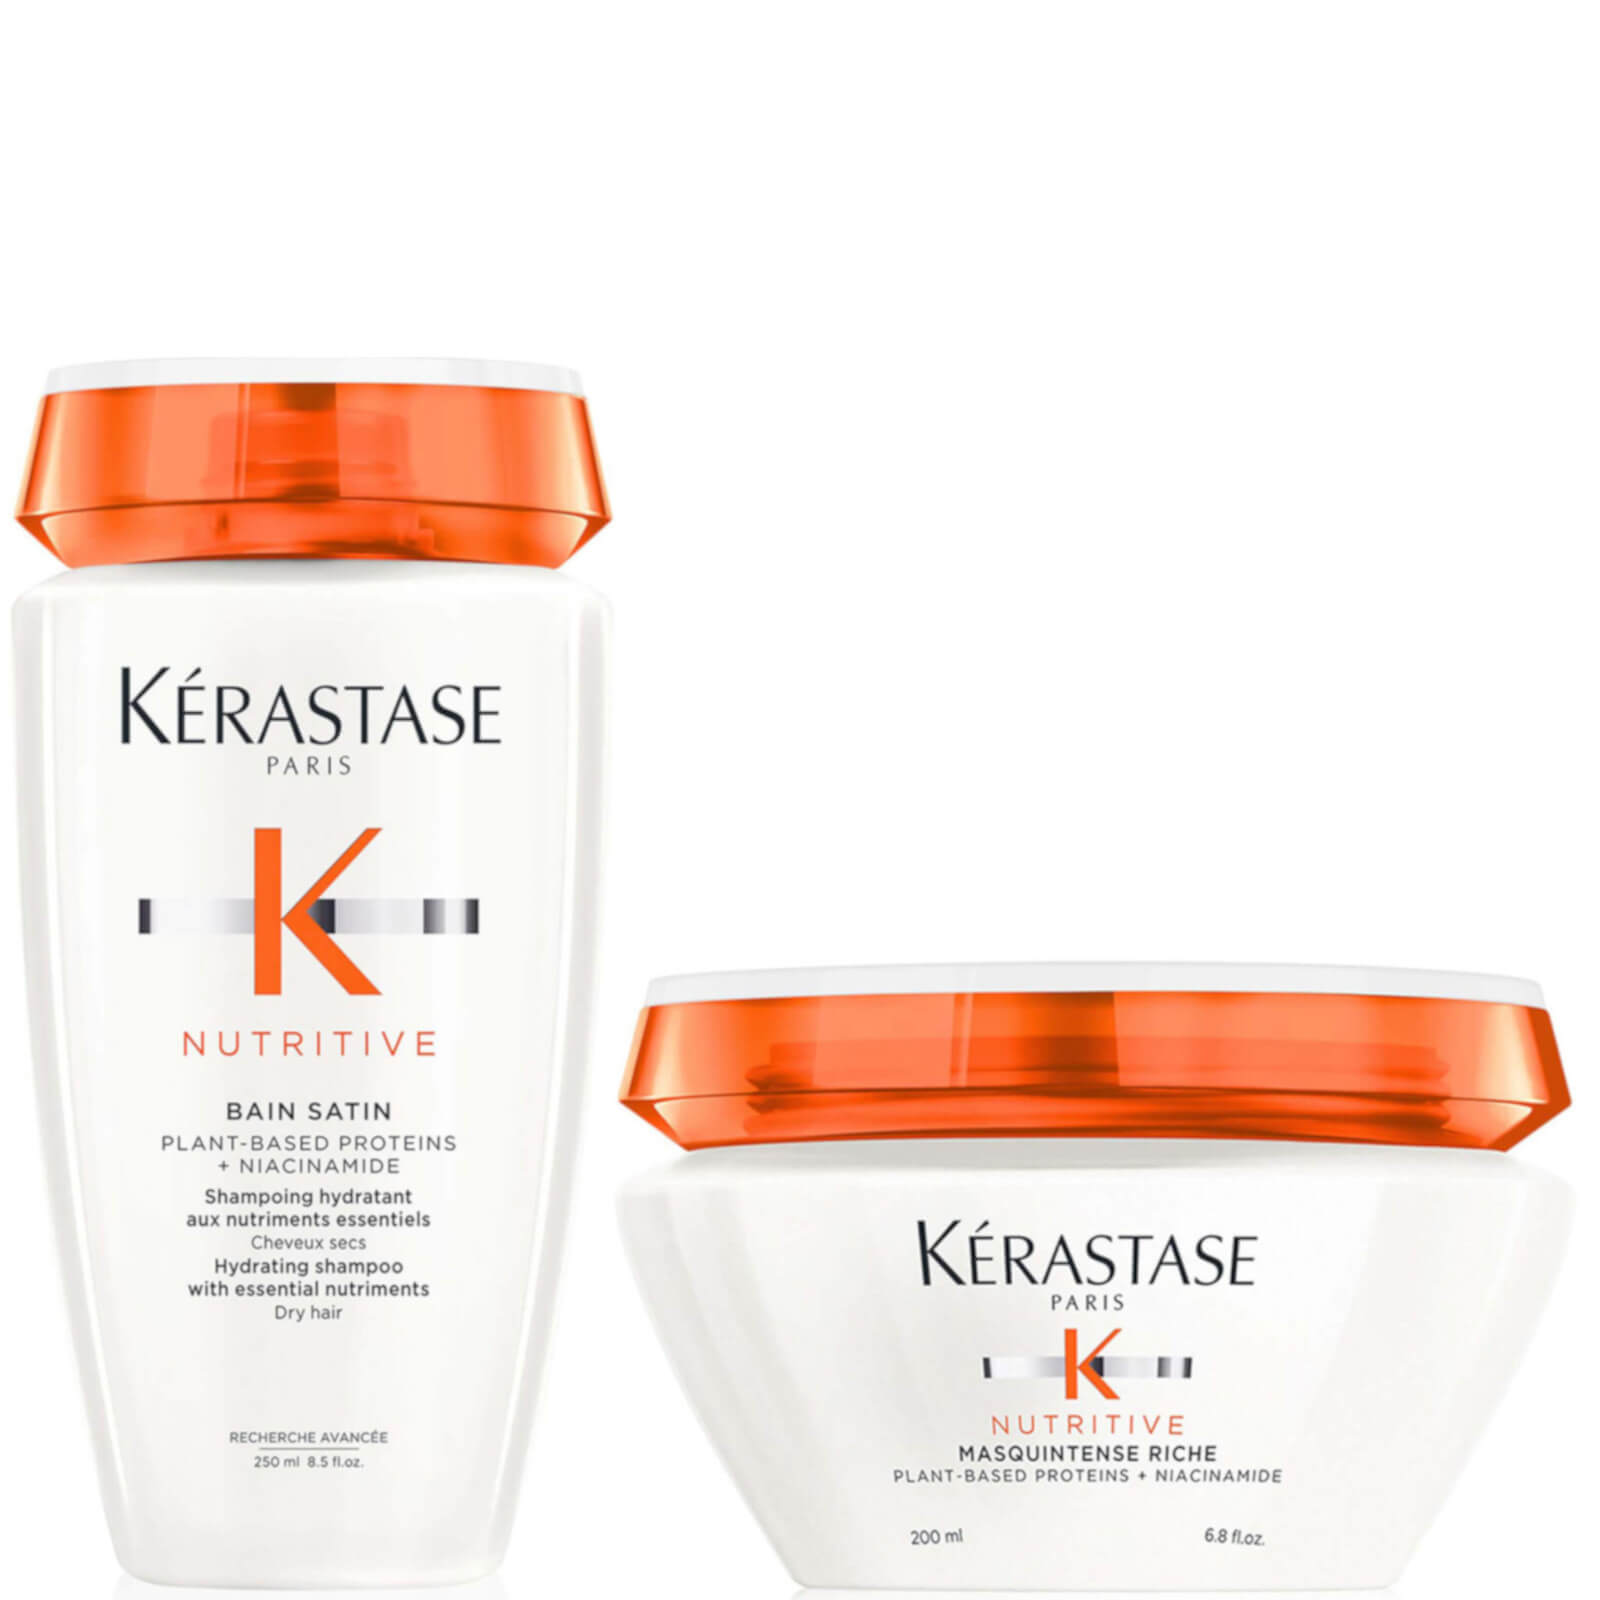 Kerastase Nutritive Nourish and Hydrate Duo for Medium-Thick Very Dry Hair